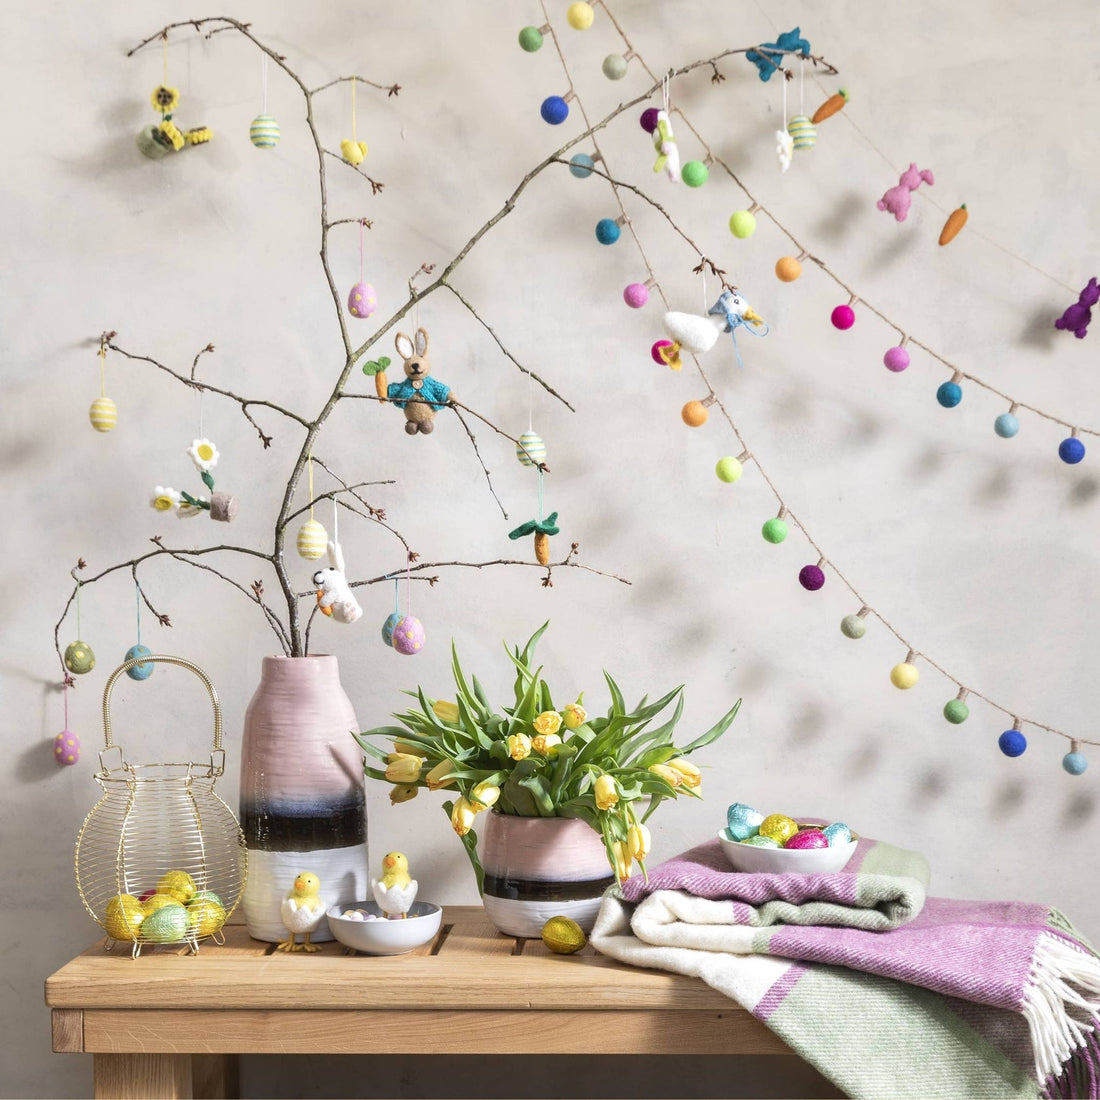 Decorating Your Home For Easter